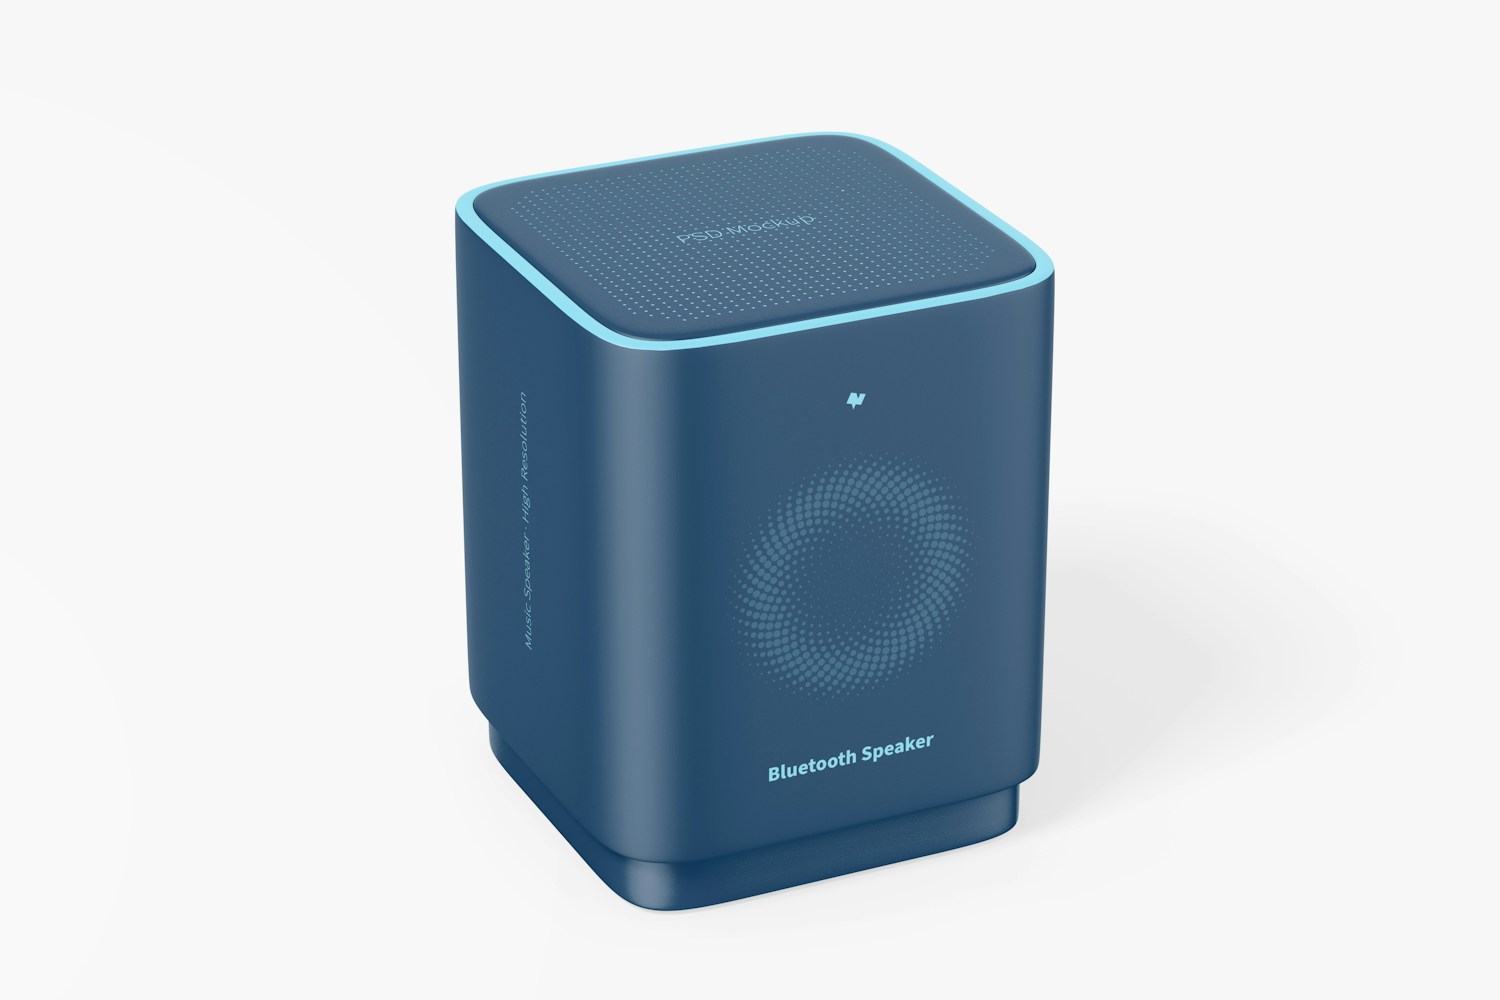 Squared Bluetooth Speaker Mockup, Front View